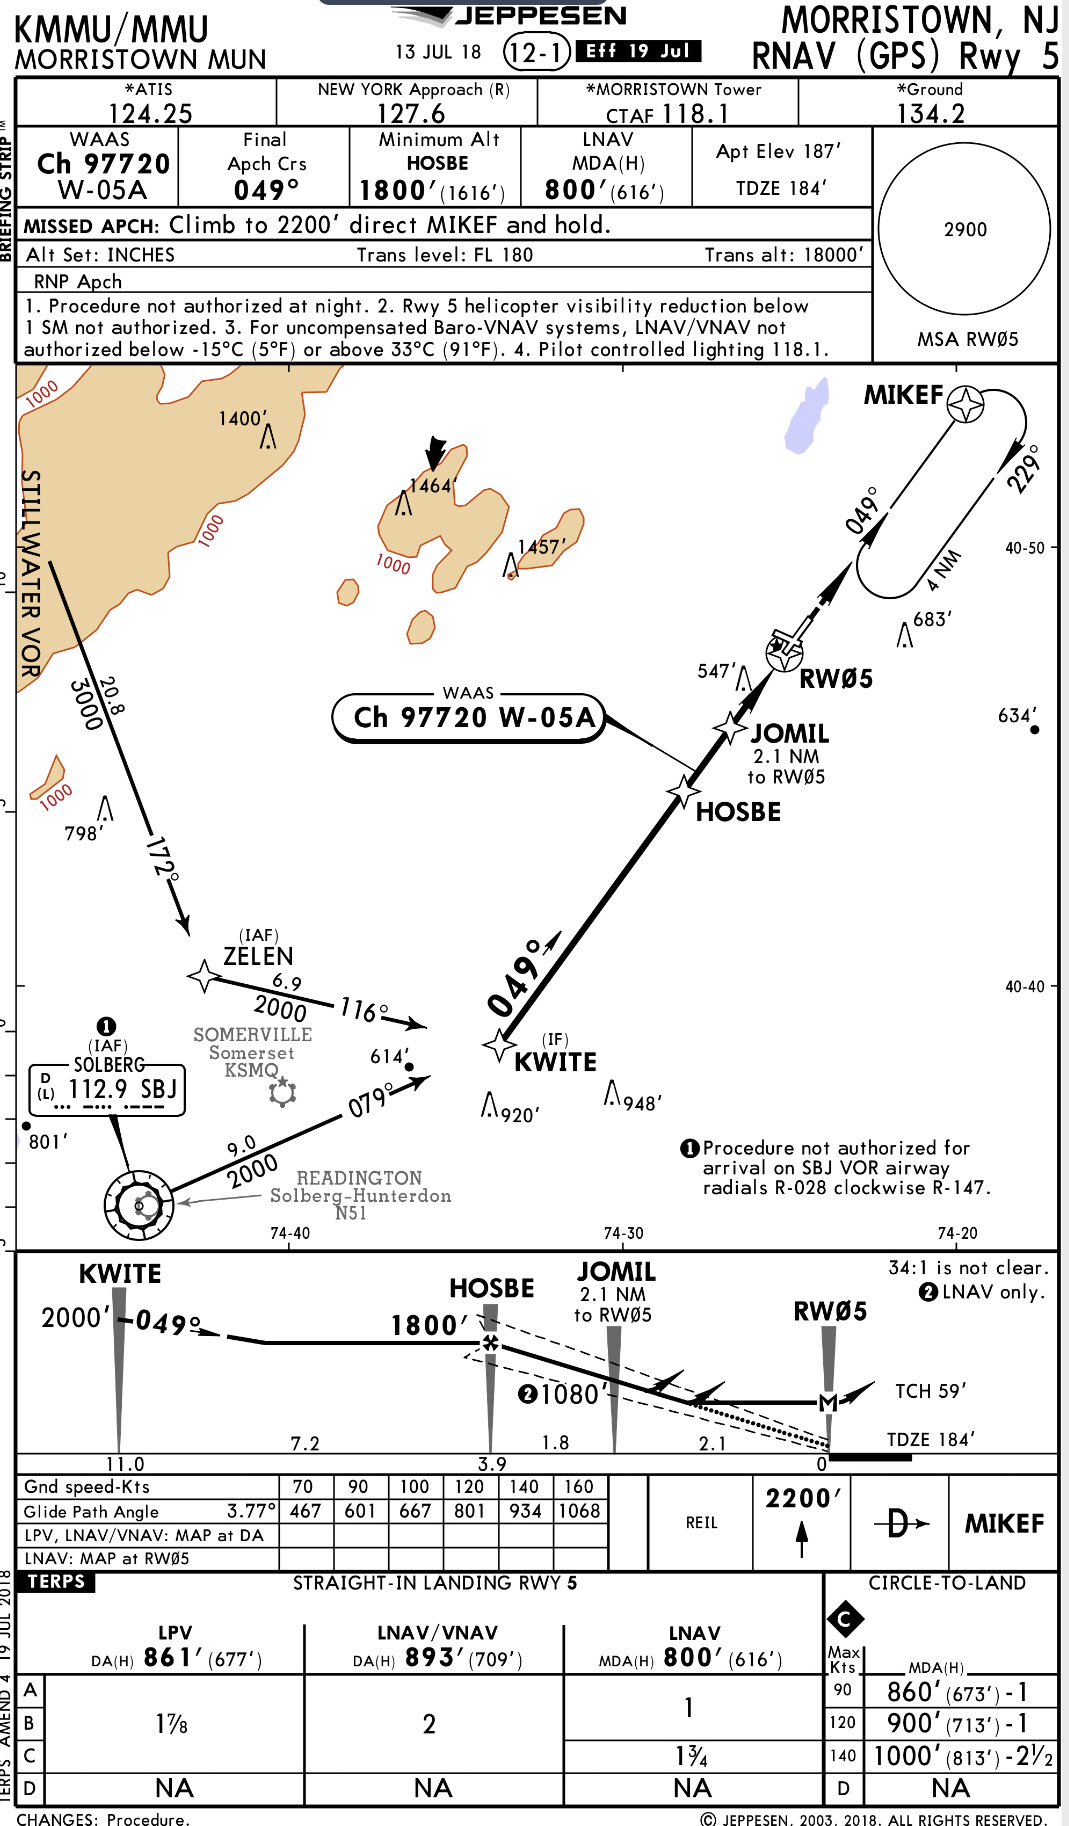 Update of New Approach Plate for RNAV (GPS) RWY5